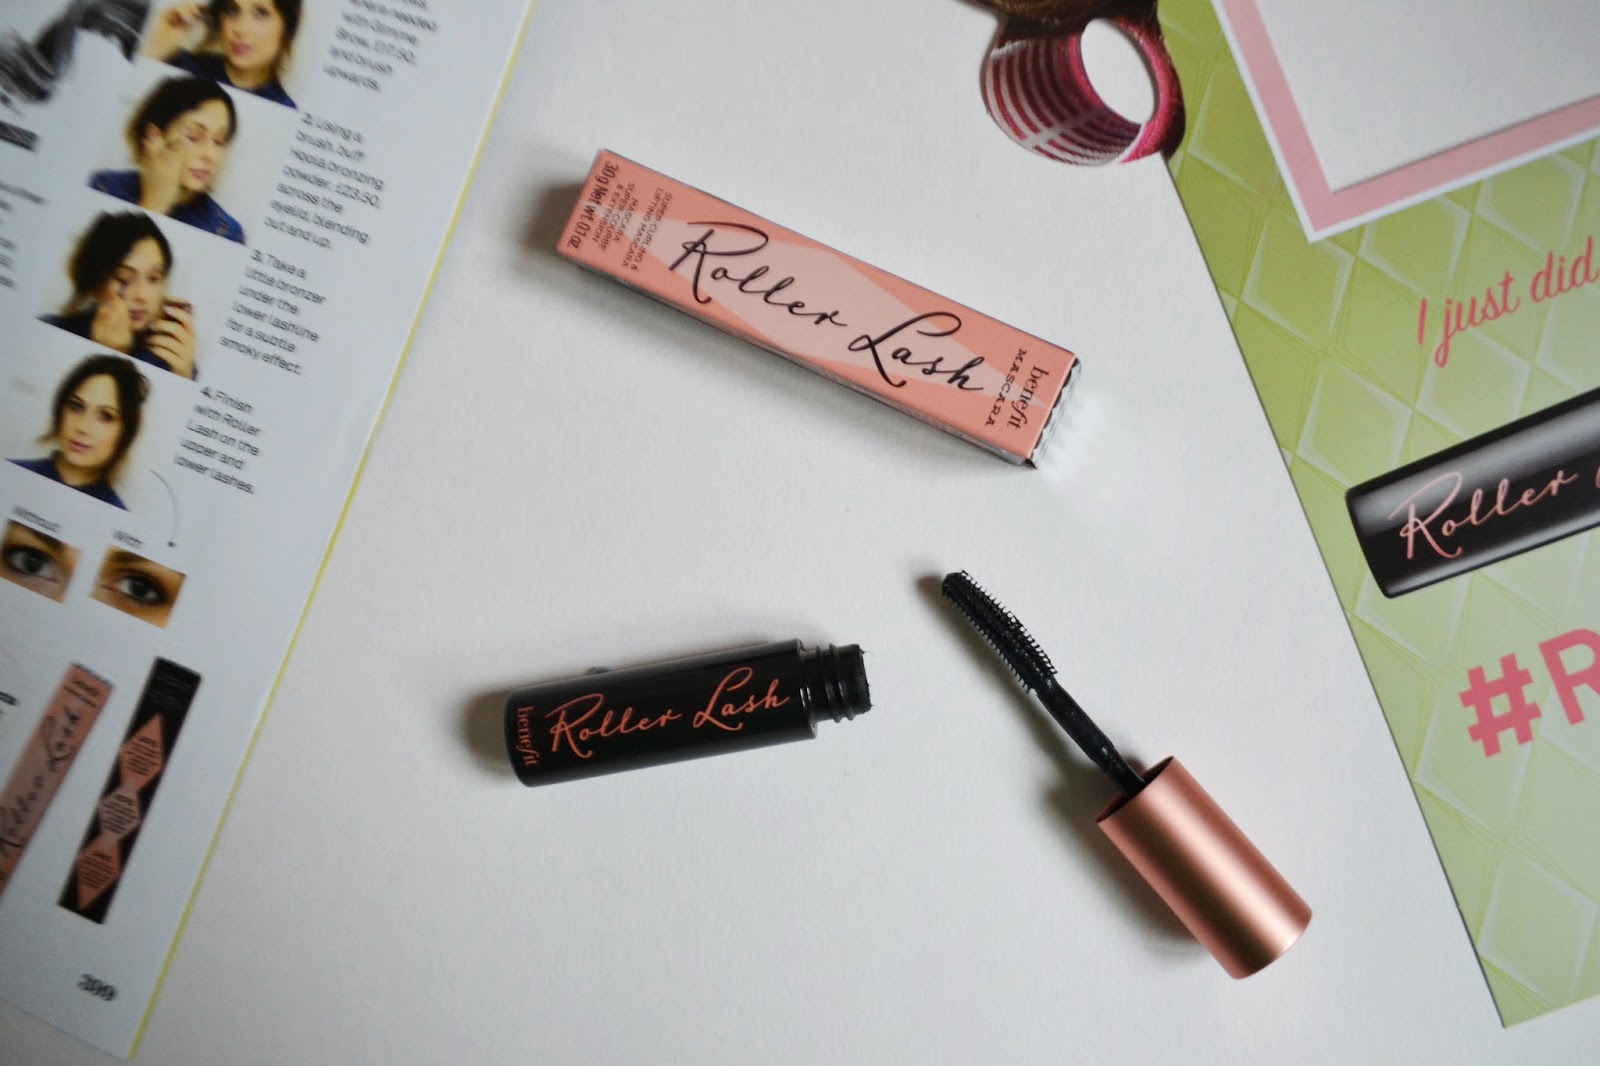 A flatlay image of the roller lash mascara open to show the wand, the mascara box can also be seen